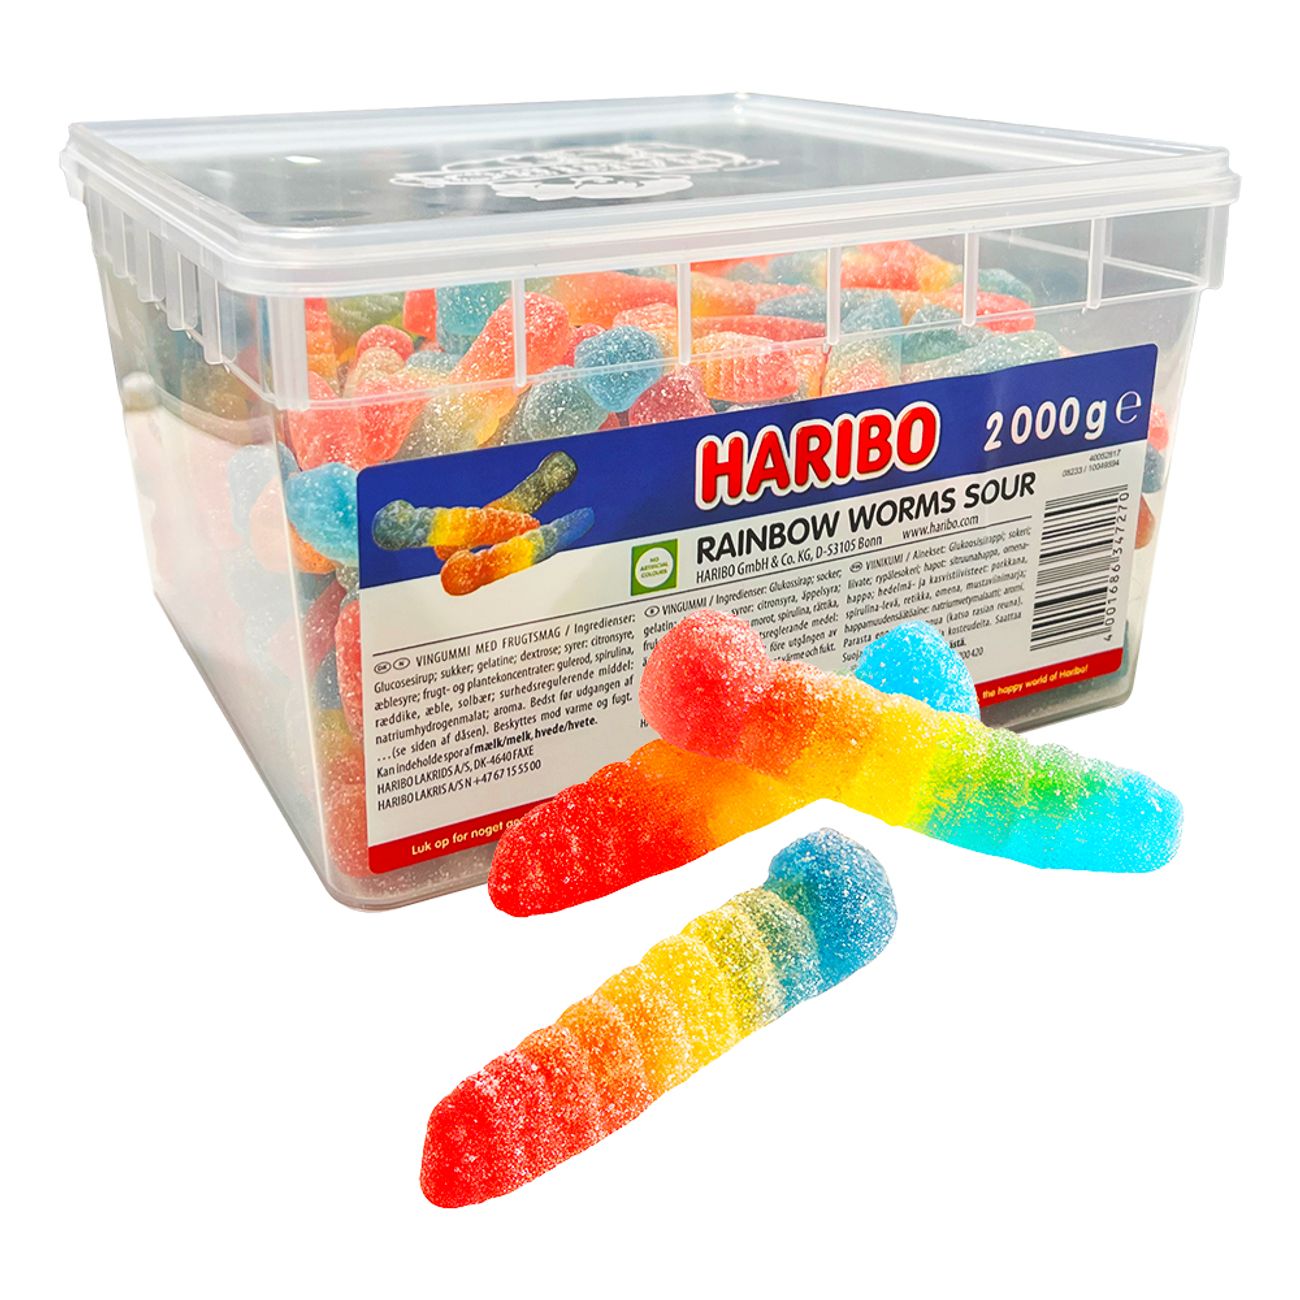 haribo-rainbow-worms-sour-storpack-96304-2